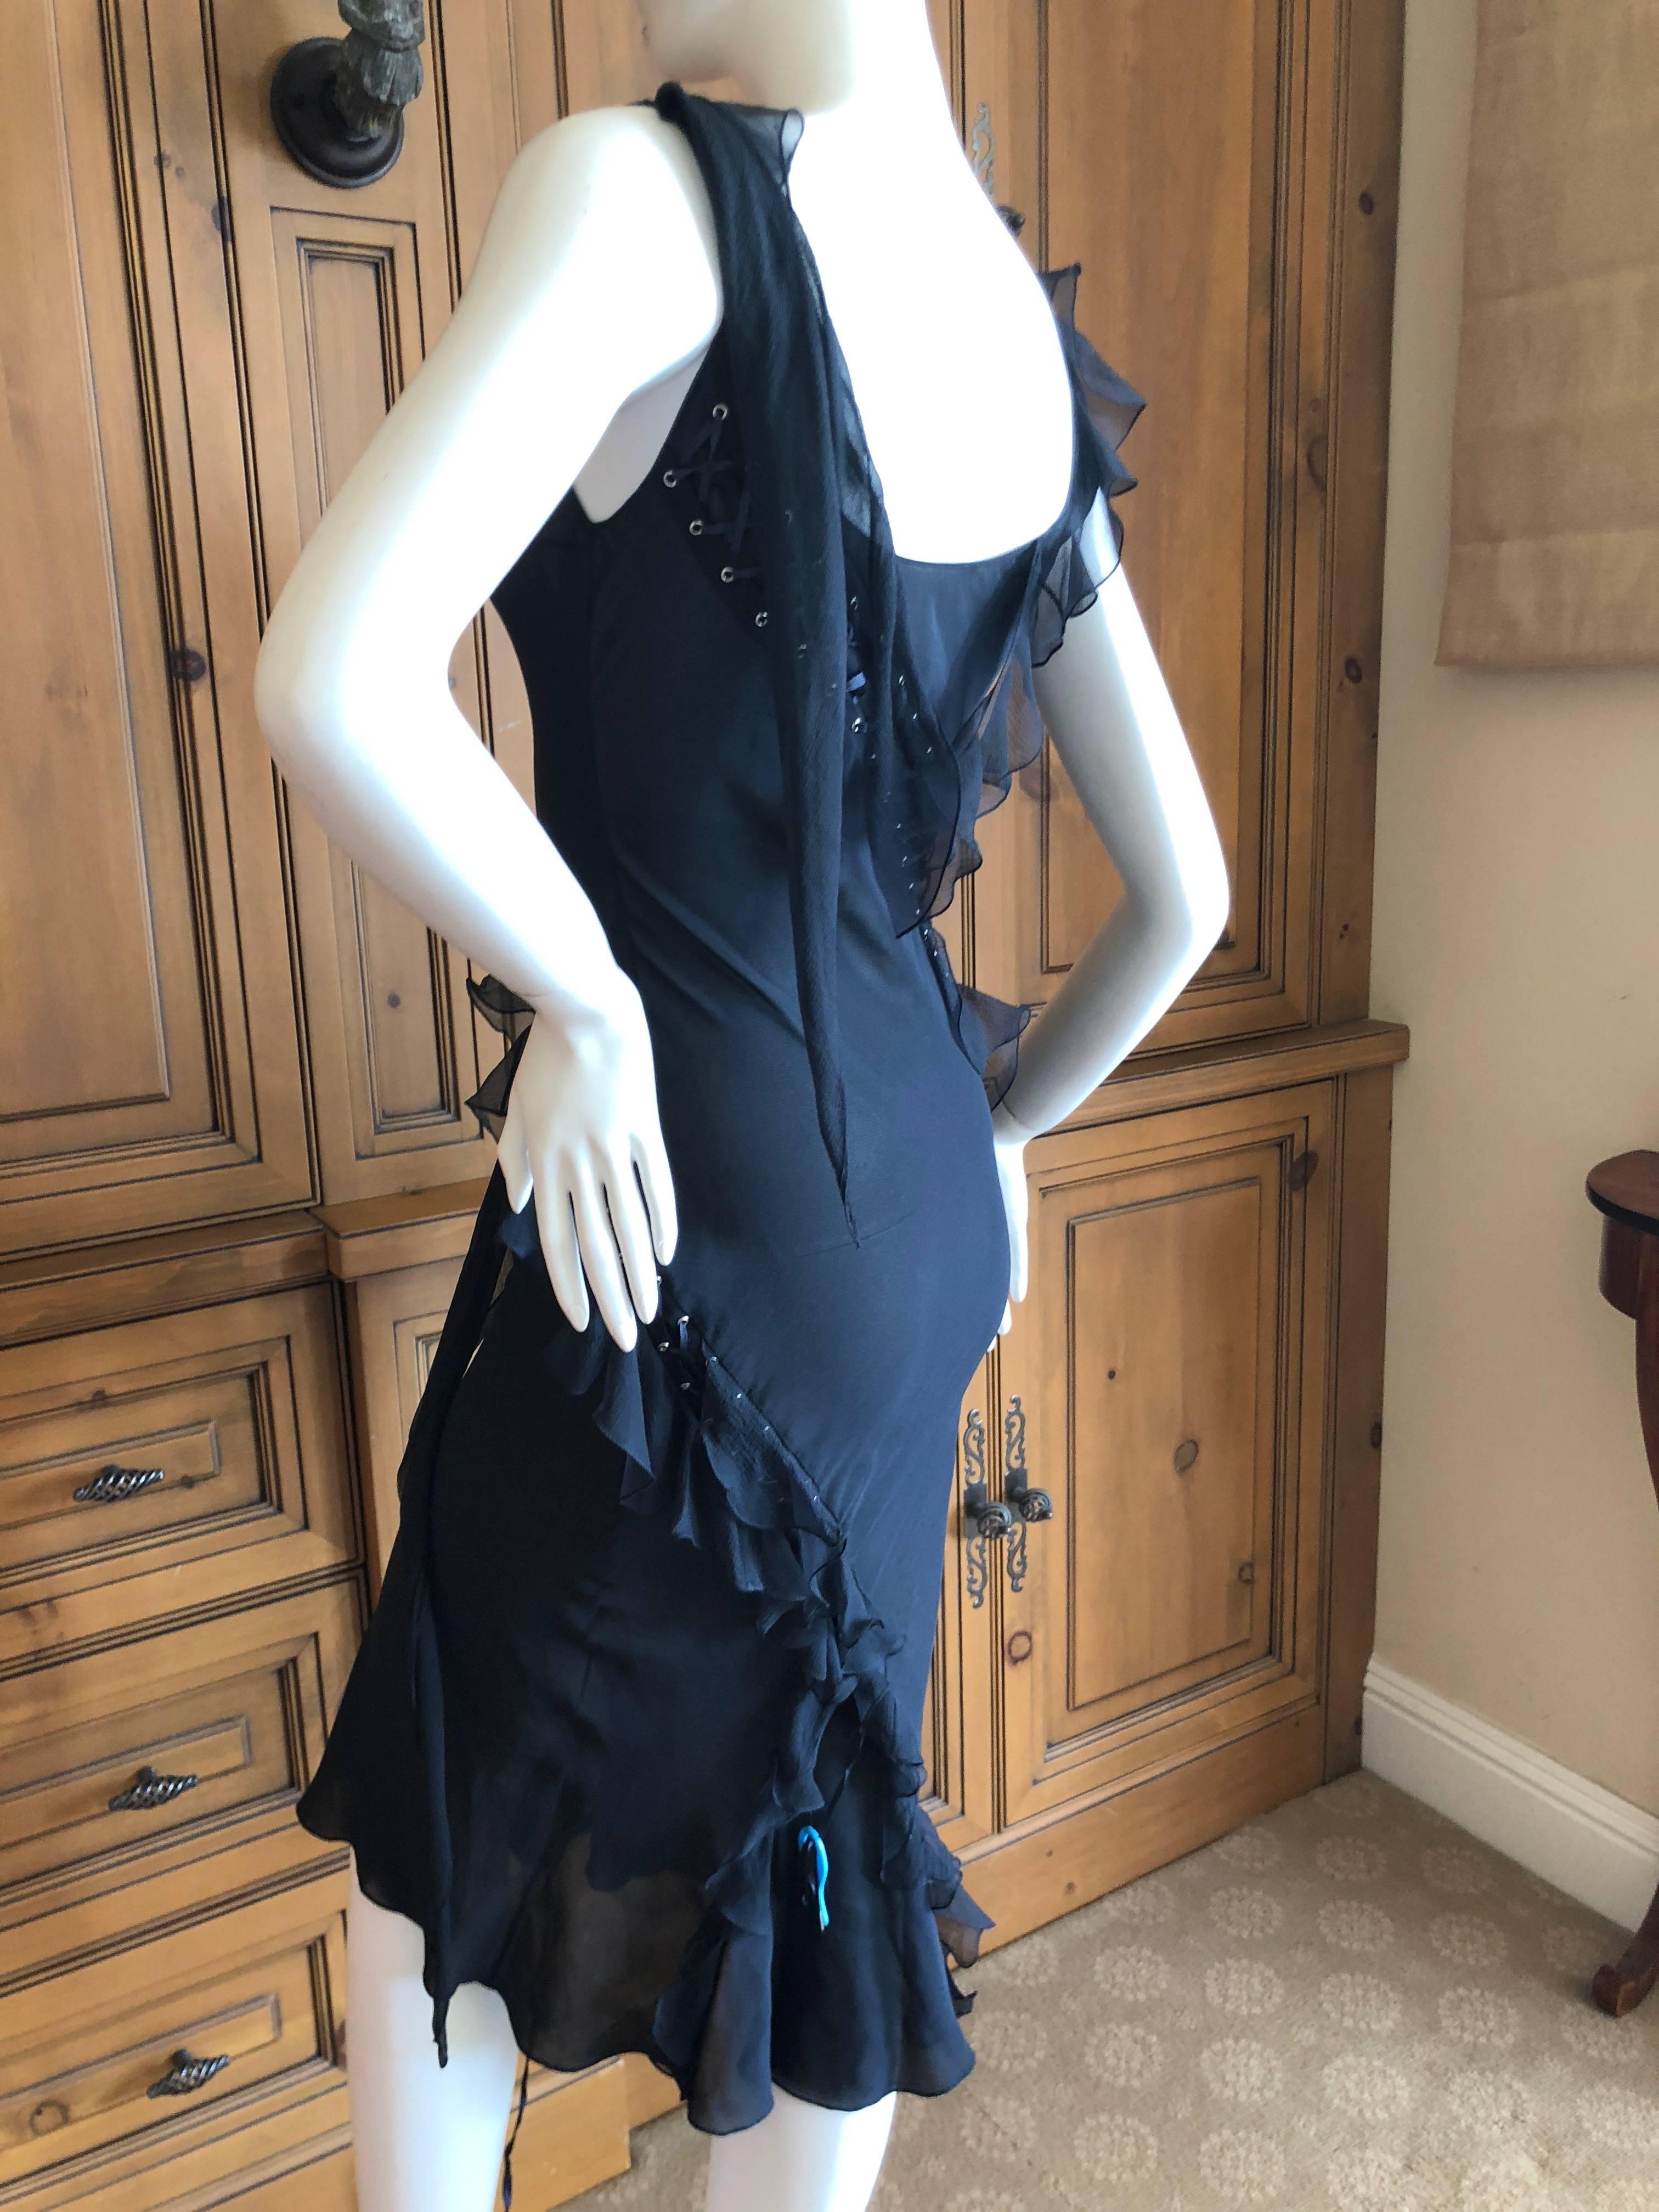 Christian Dior by John Galliano Vintage Sheer Black Dress Corset Lace Up Details 5